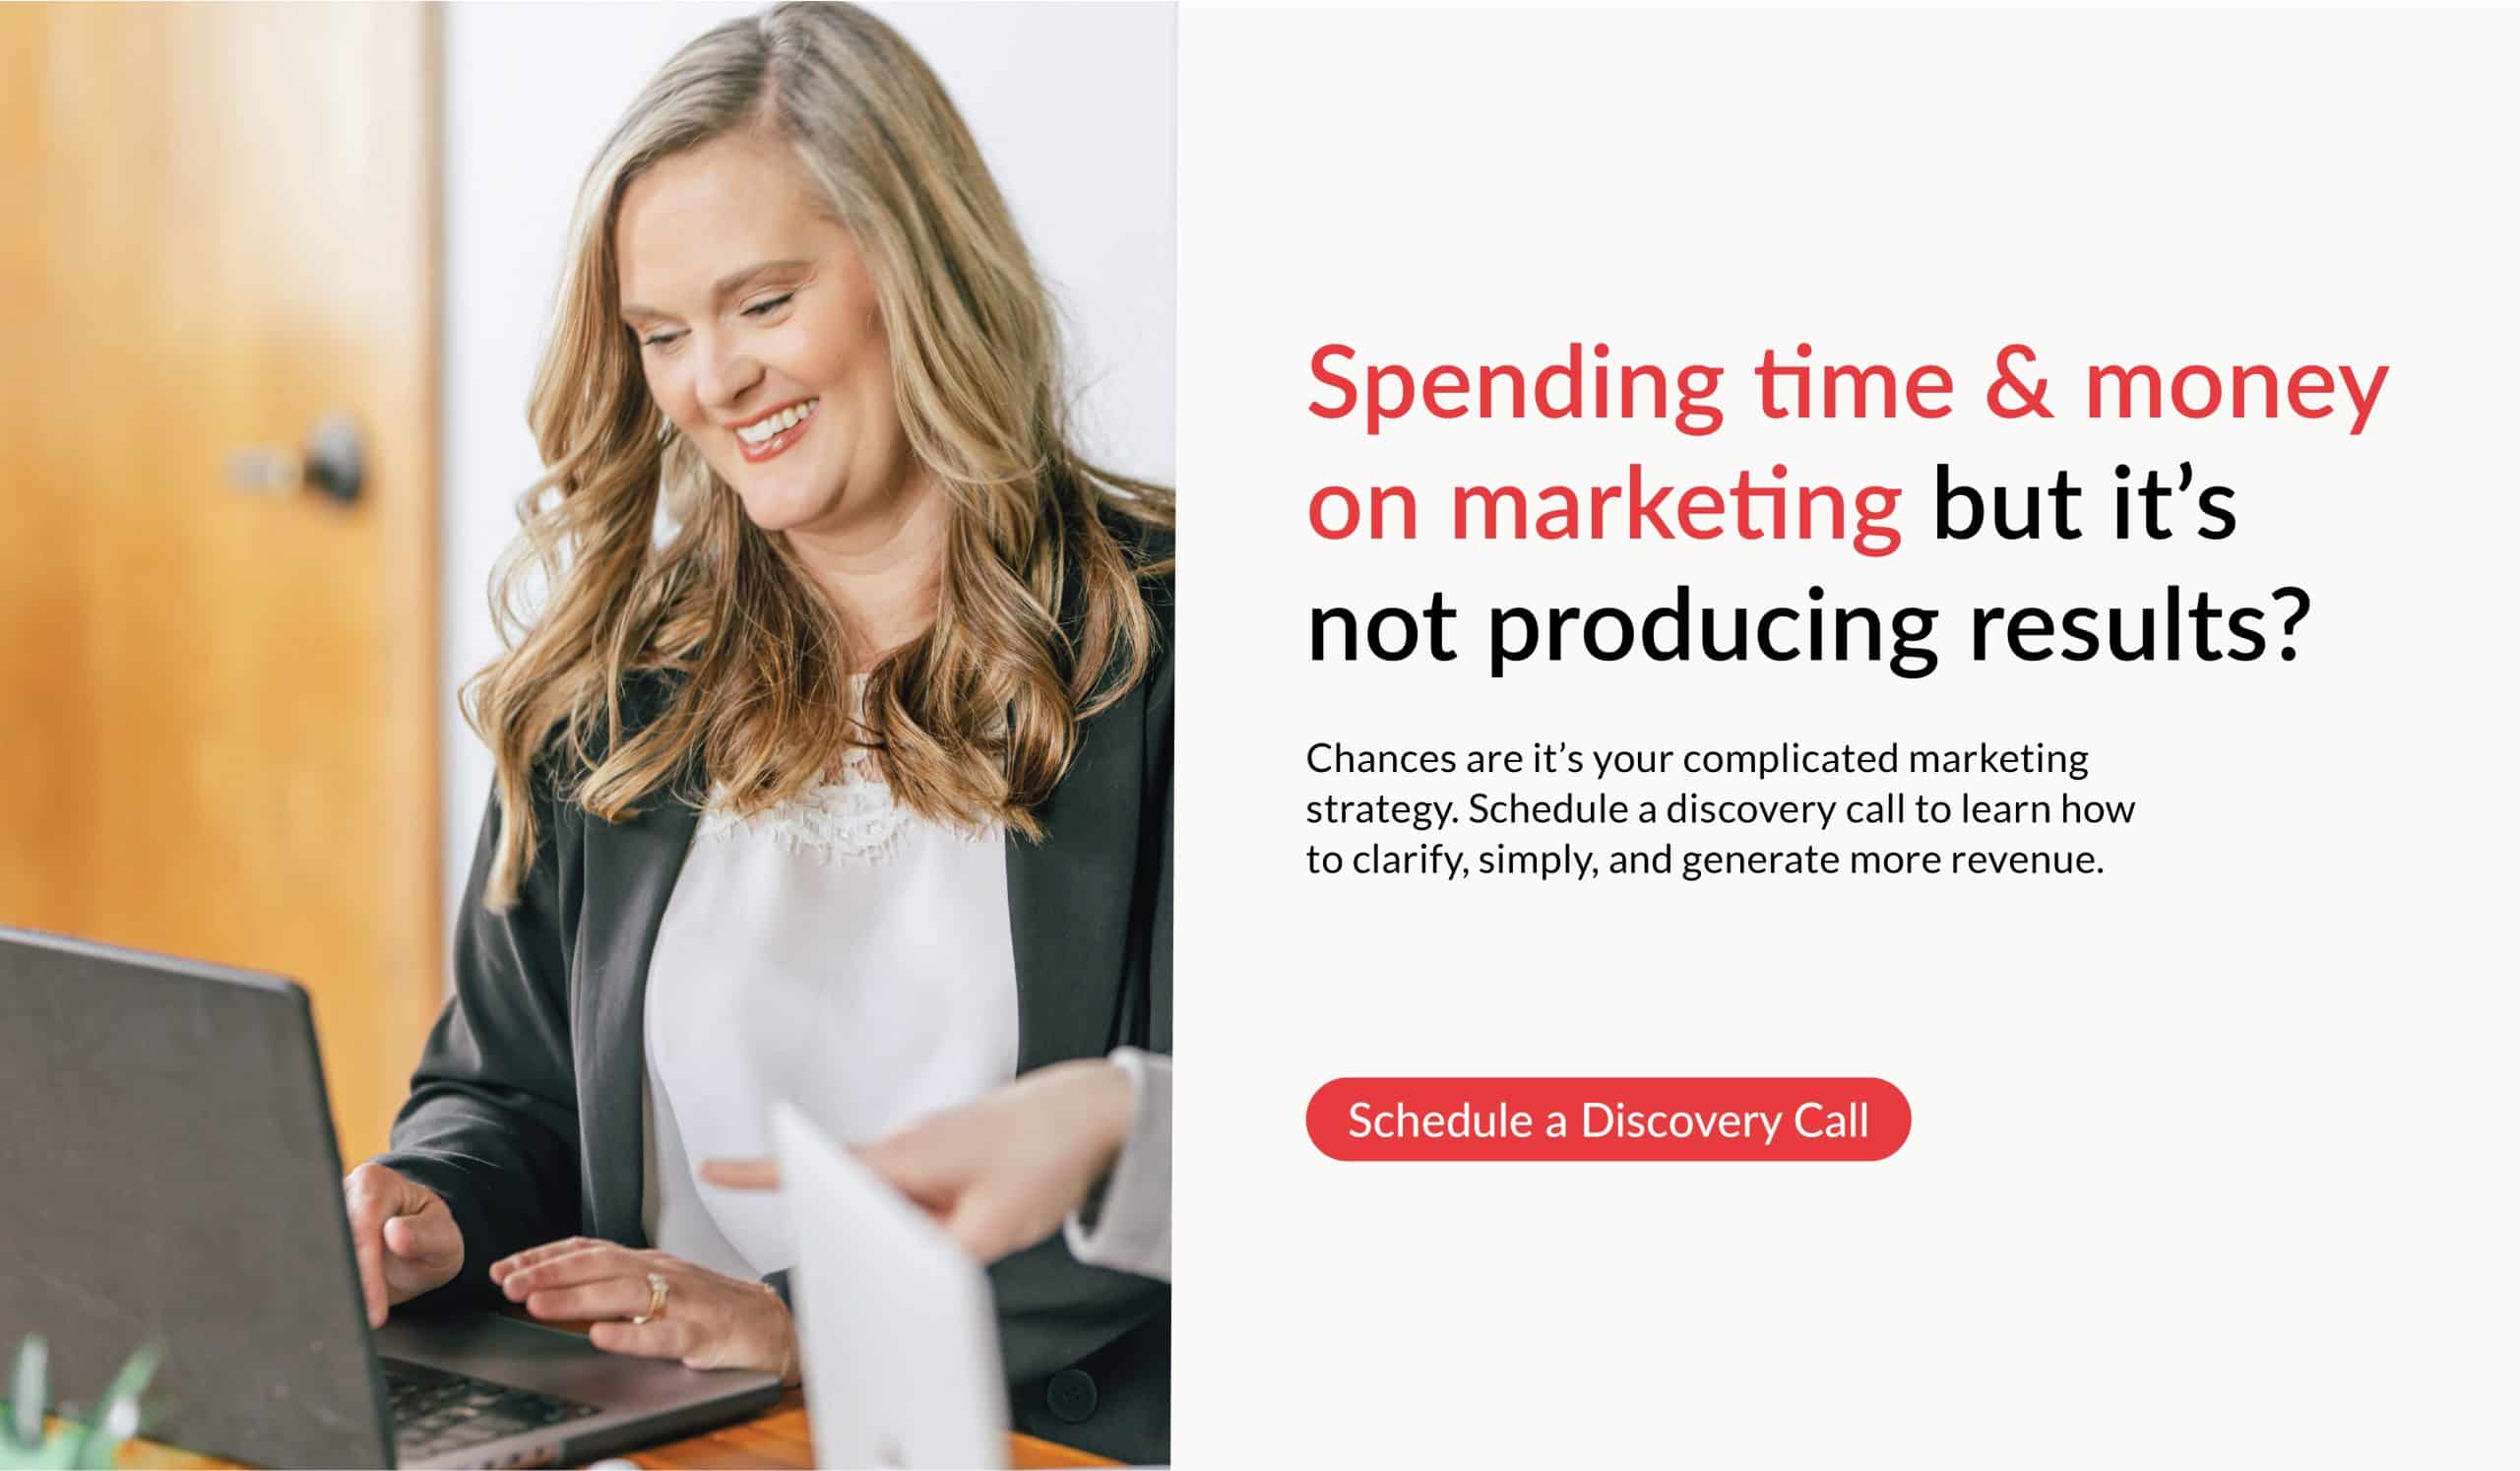 Schedule a discovery call to learn how to clarify, simply, and generate more revenue with a flywheel marketing strategy